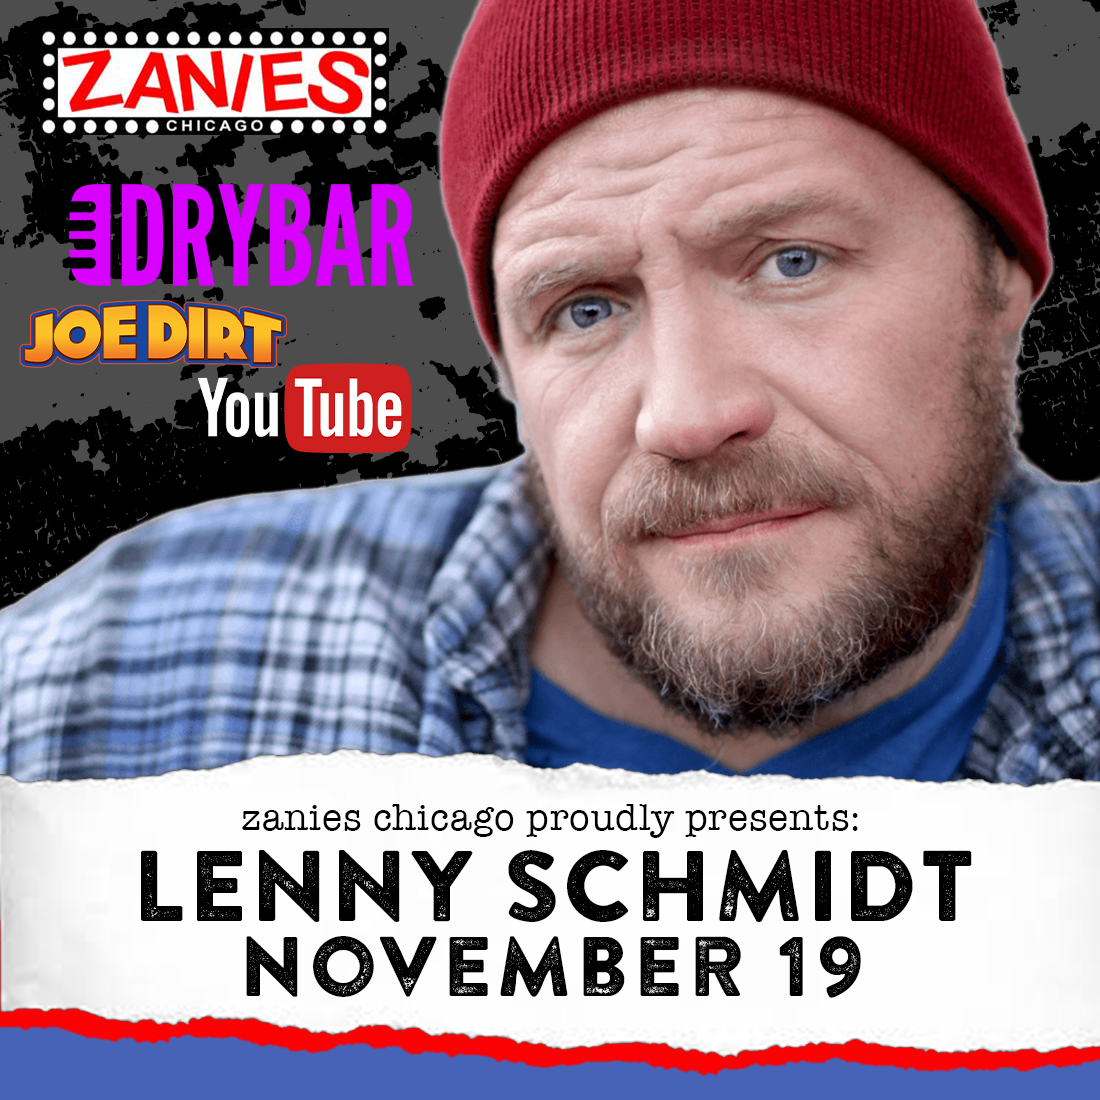 Actor and comedian @mrlennyschmidt hits the Zanies stage November 19 for one night only. You caught his hit Dry Bar Comedy special, watched him in films like Joe Dirt, and listened to his latest comedy special Secret Daddy. Grab your tix while you can--> bit.ly/Chicago_Lenny